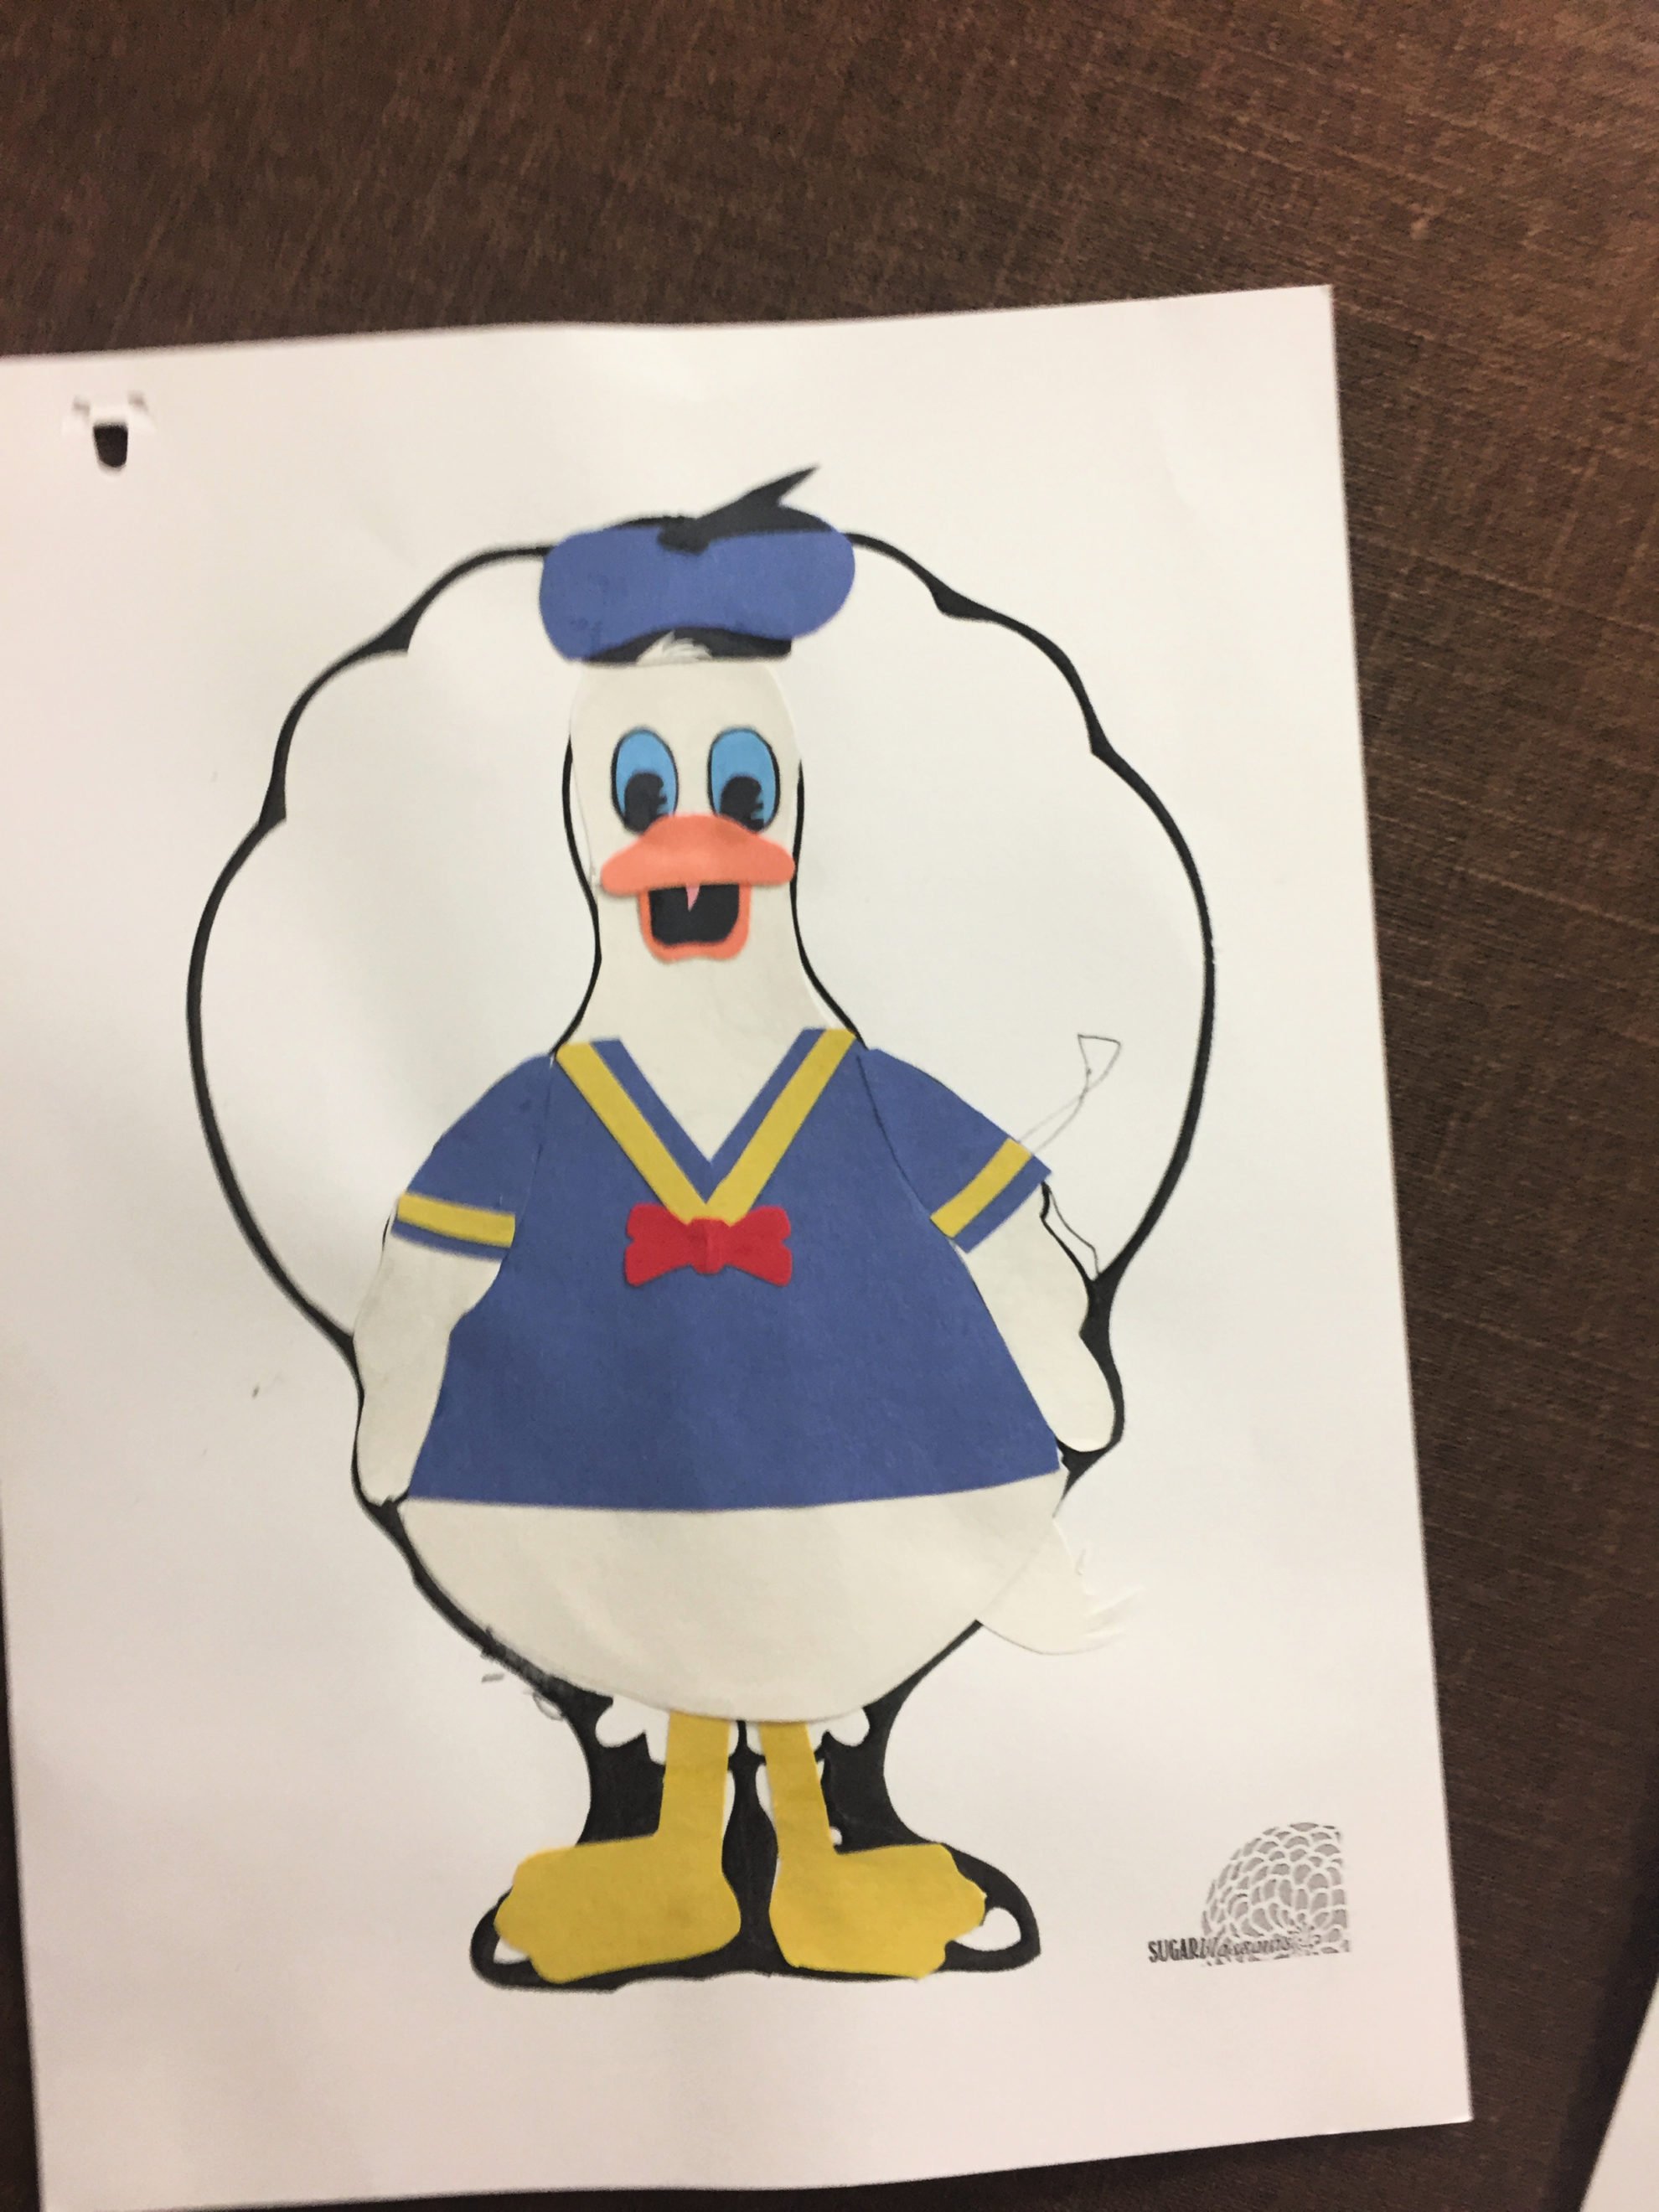 Paper Turkey In Disguise dressed as Donald Duck with construction paper clothing.